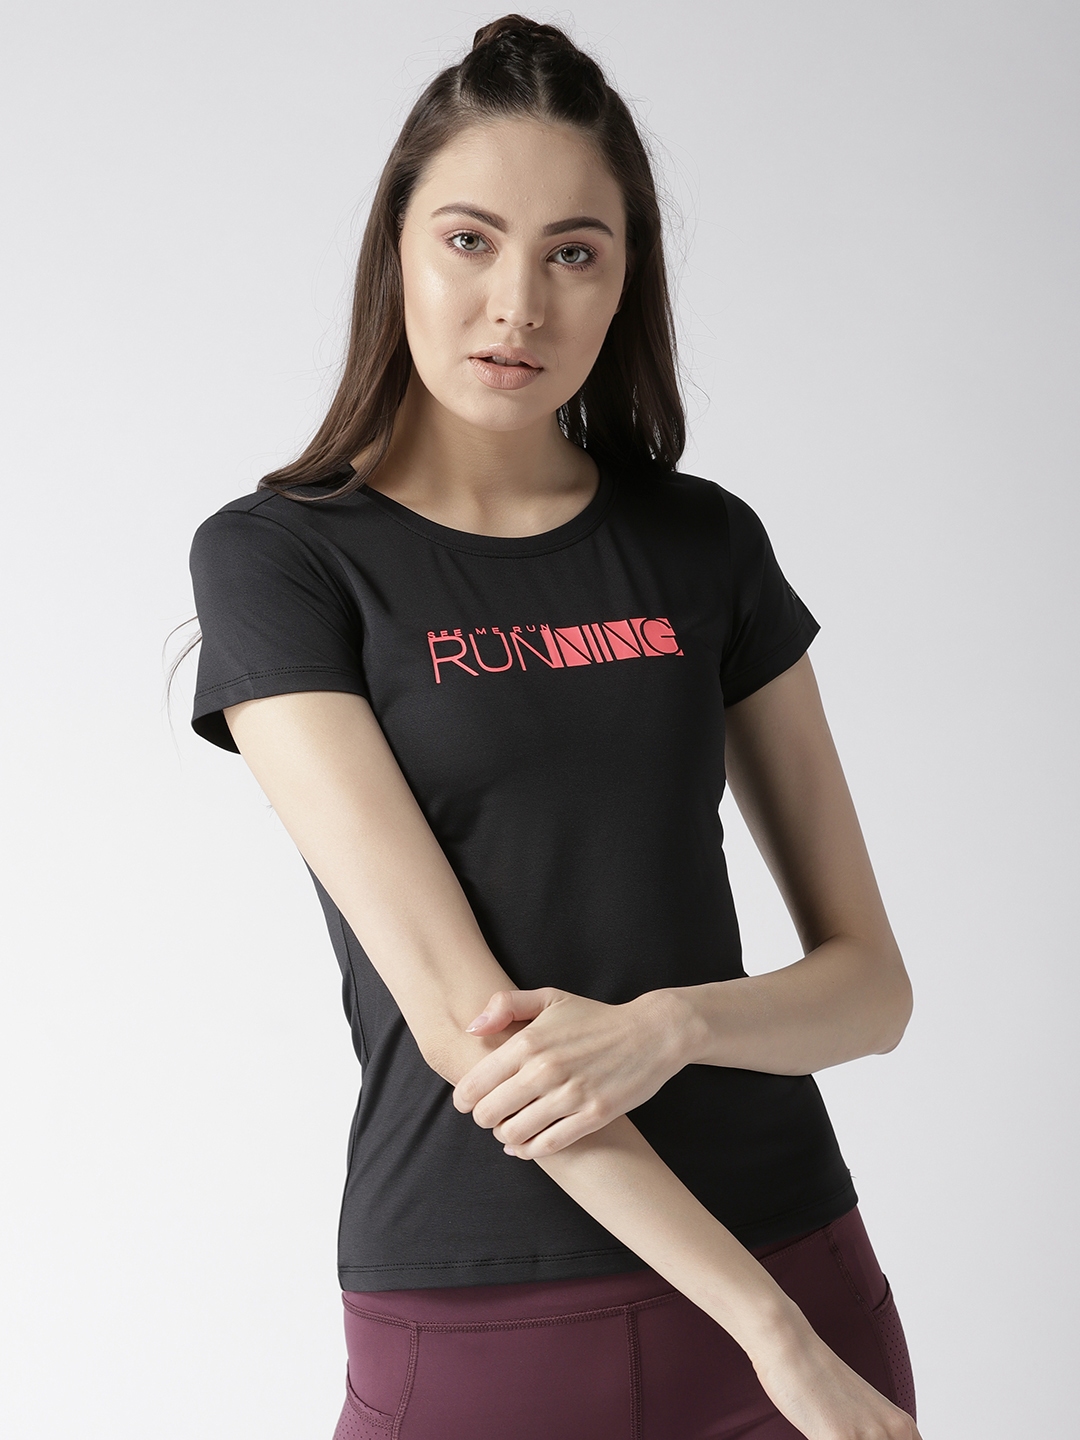 Buy Fitkin Women Black Solid Round Neck Slim Fit Quick Dry Running T Shirt  - Tshirts for Women 9781019